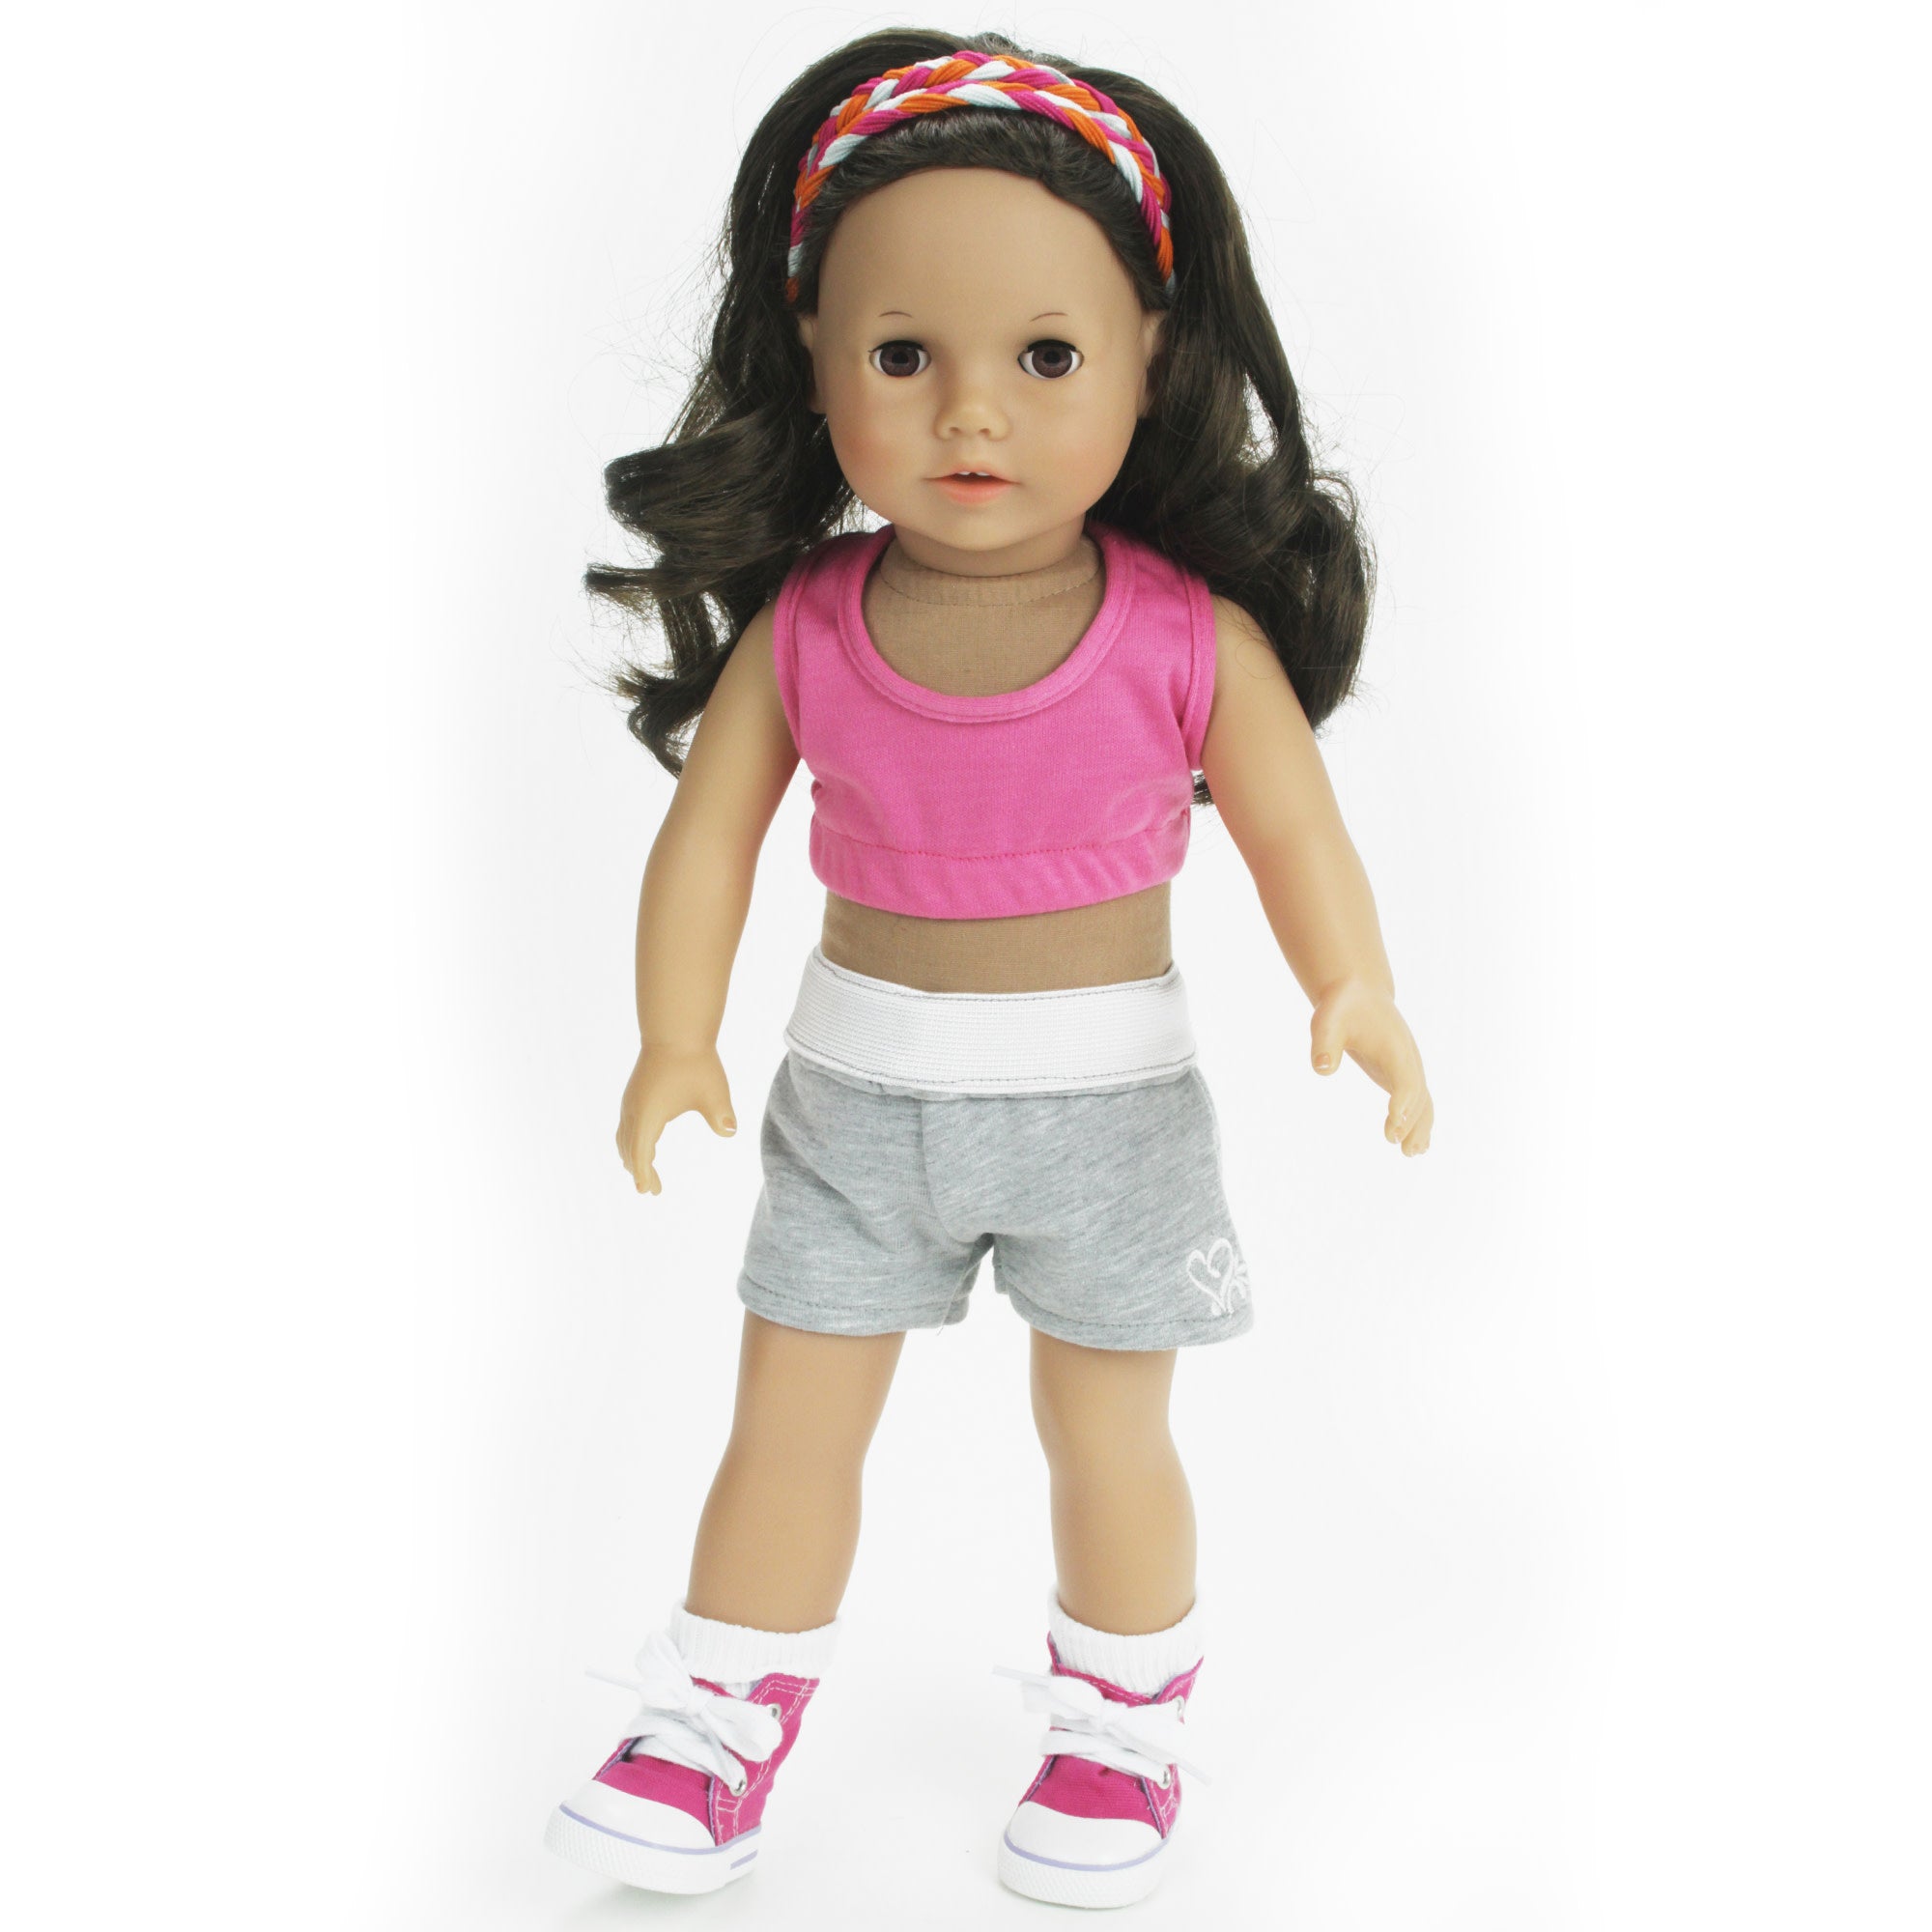 Sophia's Sports Set with Bra, Shorts, Socks and Hi-Top Sneakers for 18" Dolls, Pink/Gray